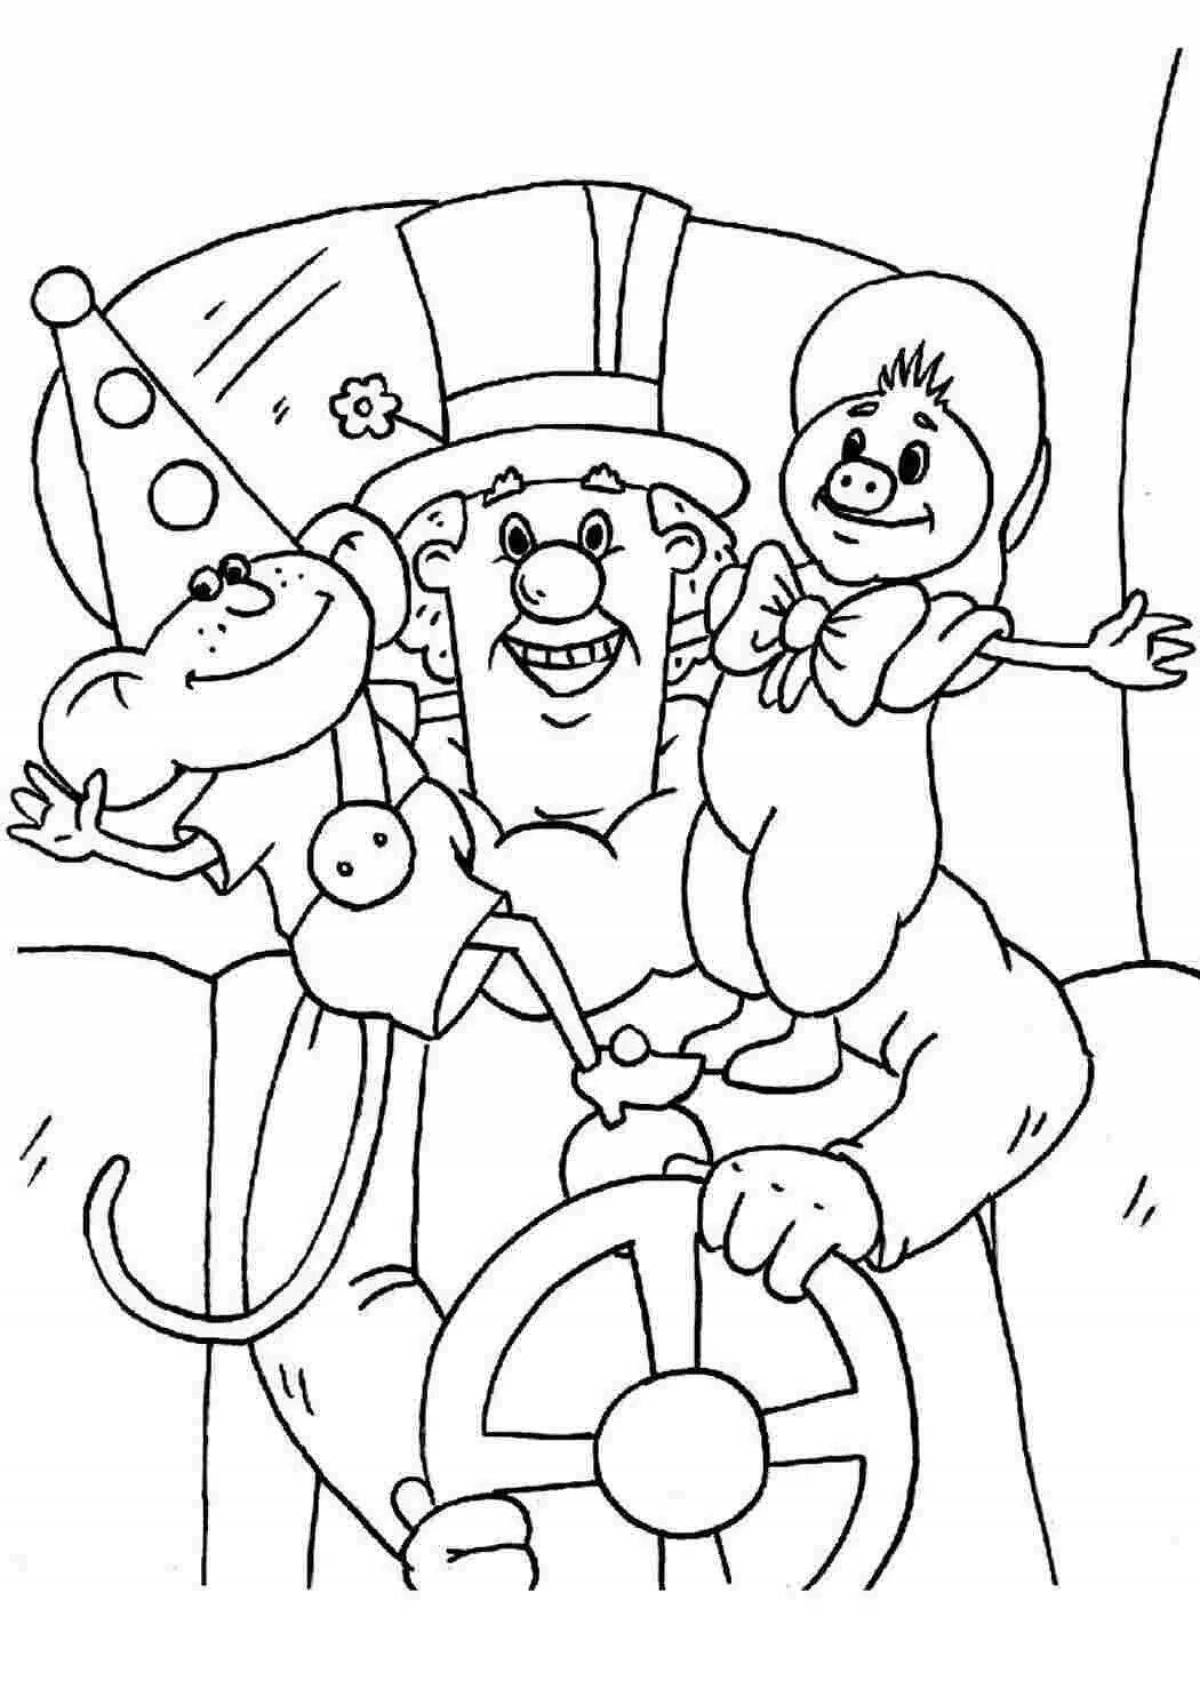 Colorful pound sterling coloring page for kids